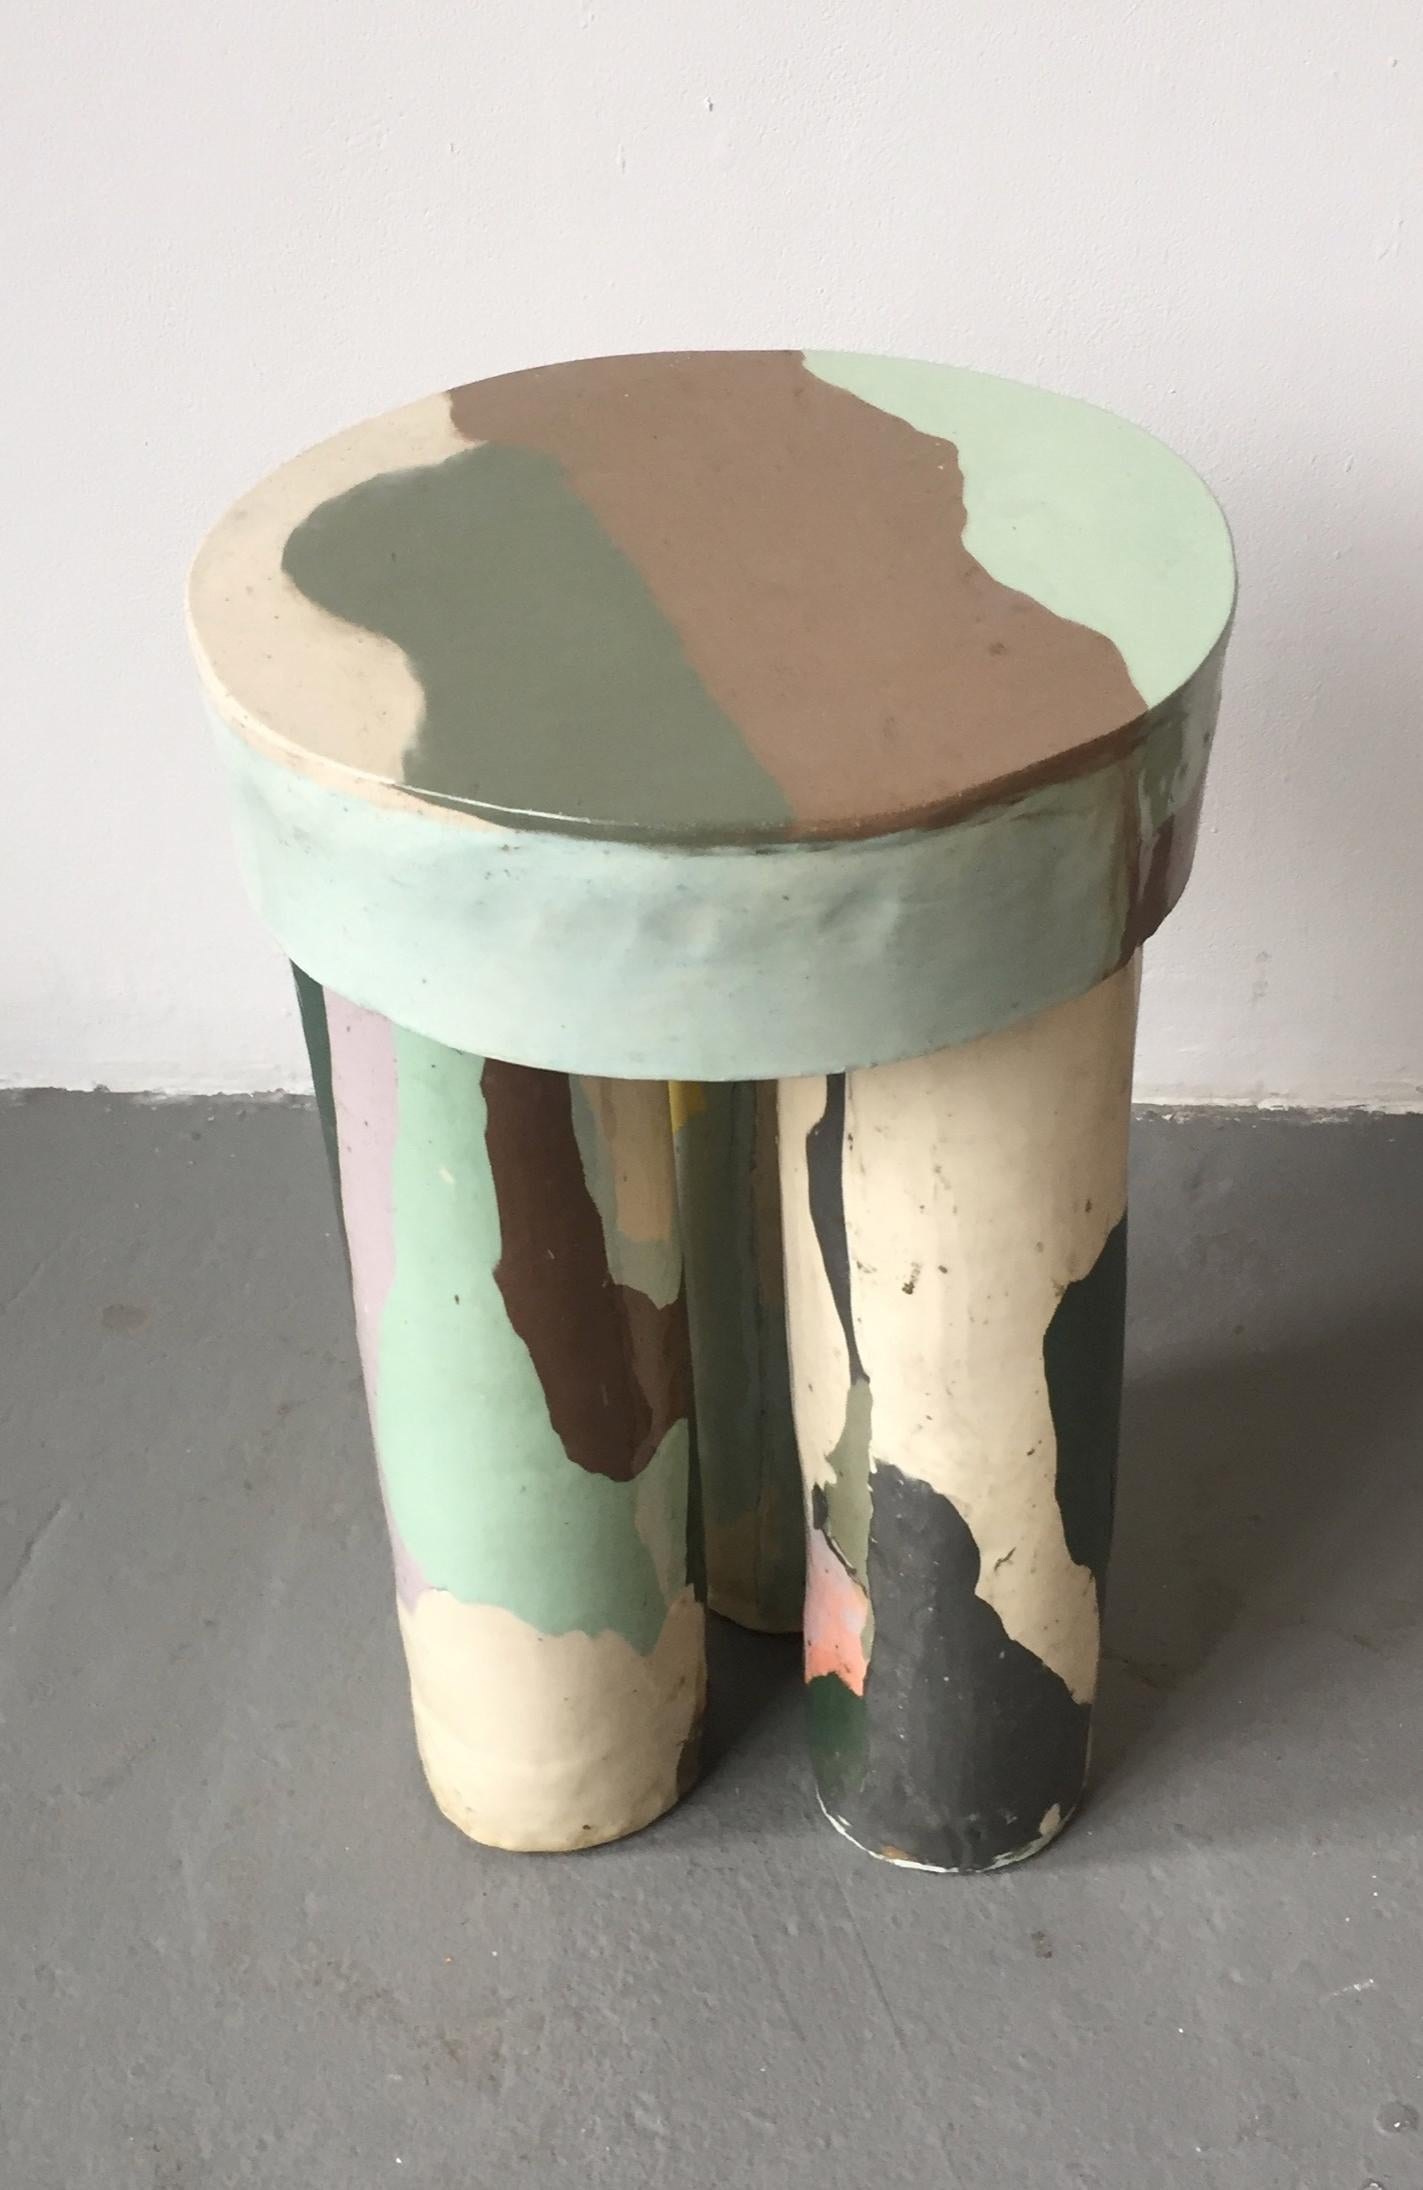 Modern Stool in Hand-Built Glazed Ceramic by Katie Stout, 2018